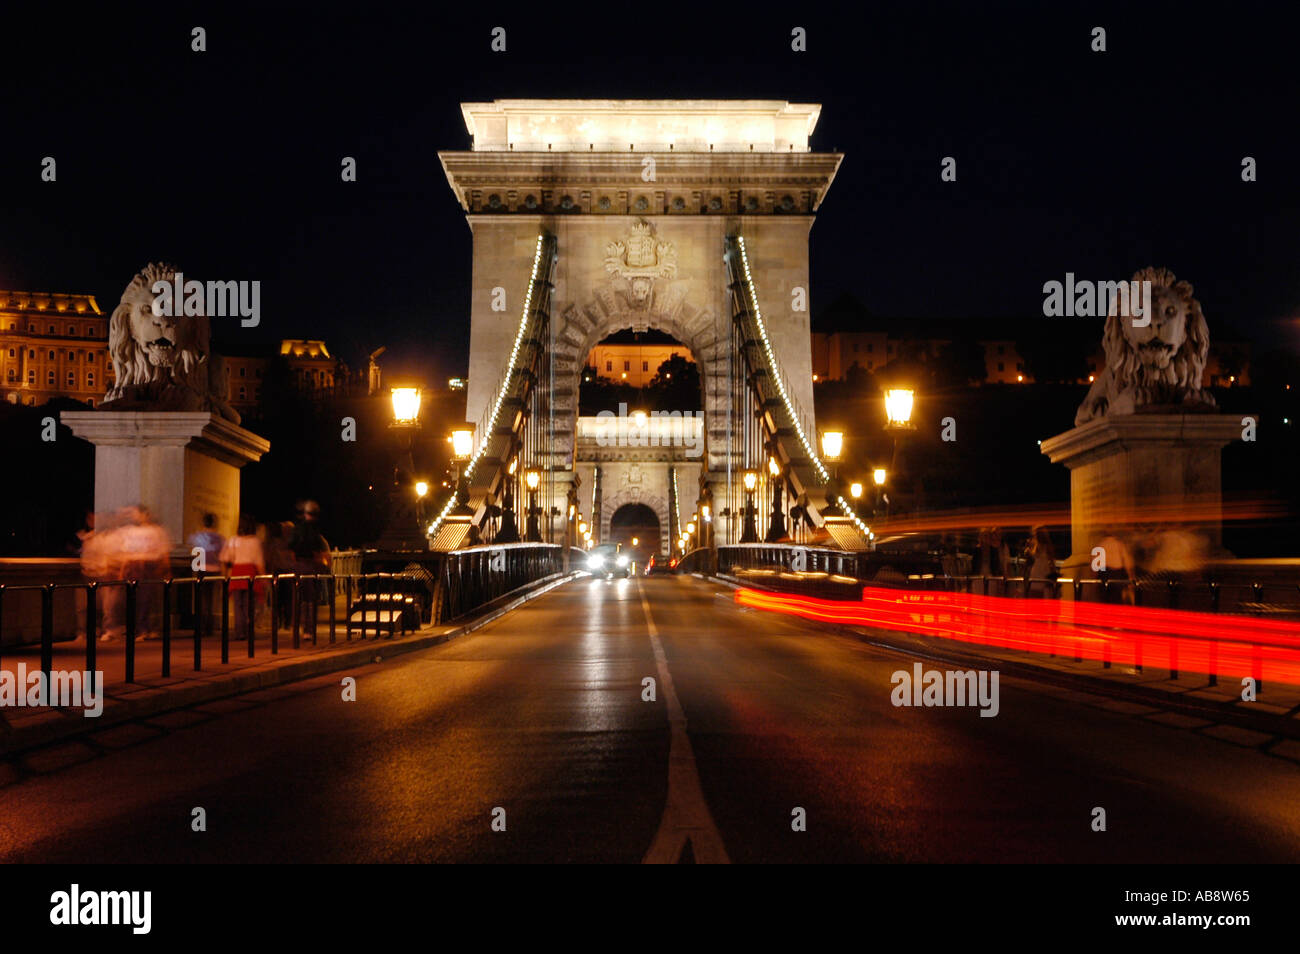 View at night of the Szechenyi Chain Bridge a suspension bridge that spans the River Danube between Buda and Pest in Budapest Hungary Stock Photo